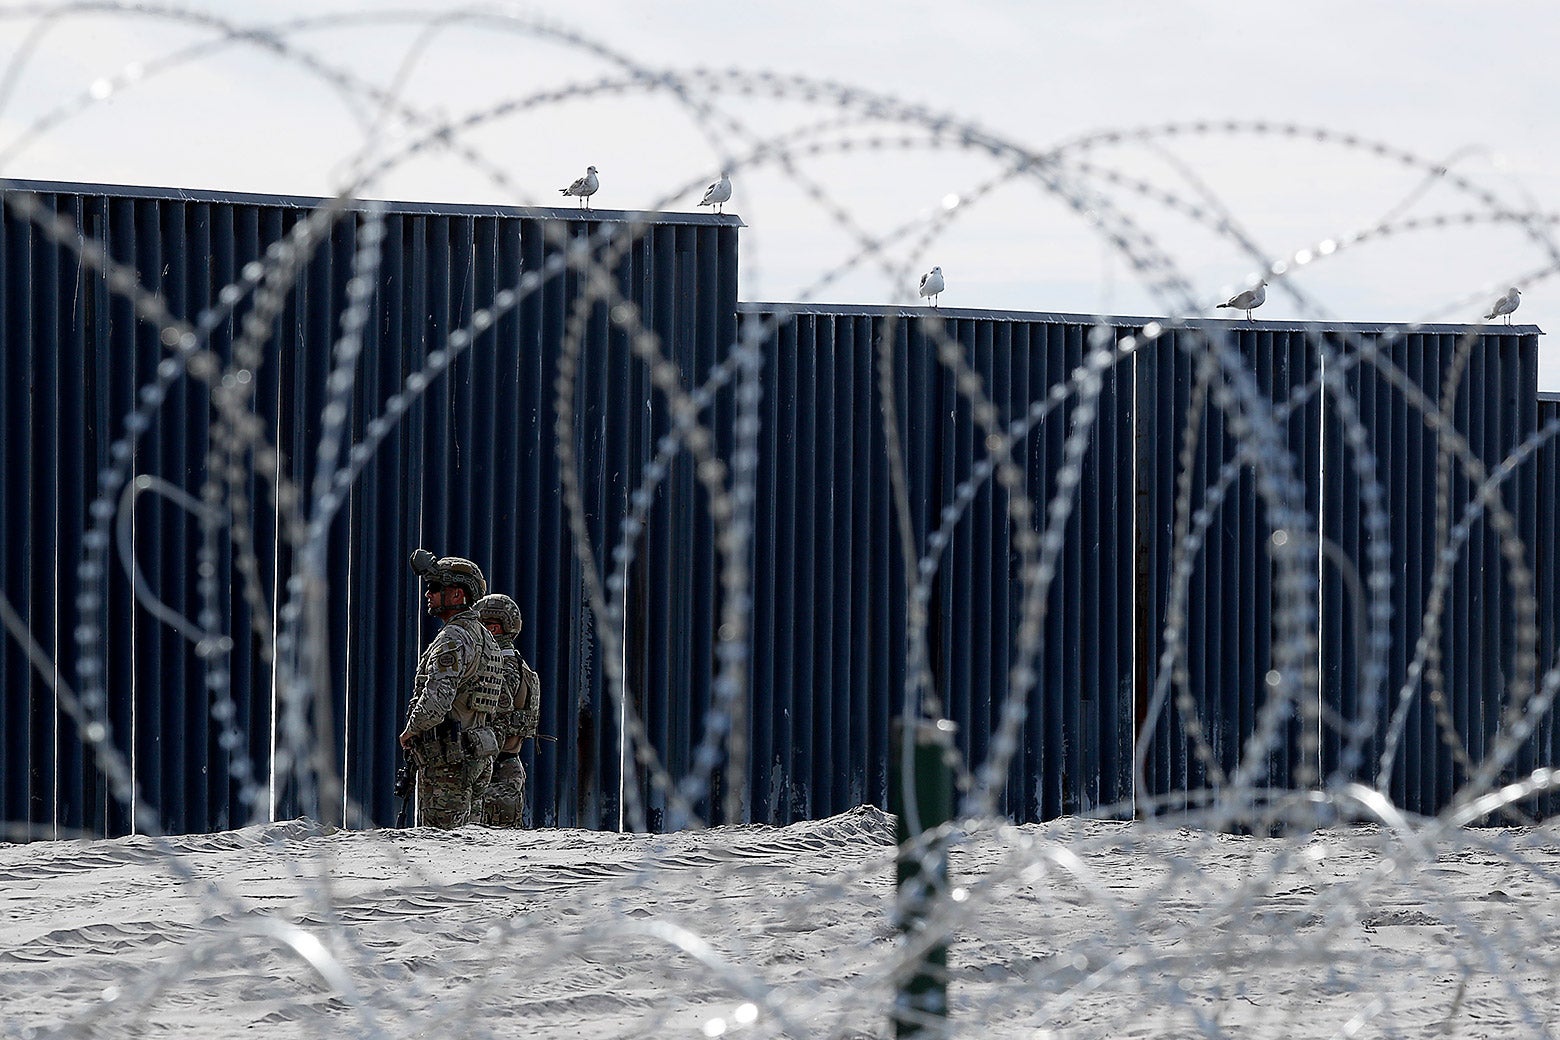 U.S. Border Patrol officers stand guard beside the border wall in Imperial Beach, California on Nov. 15.